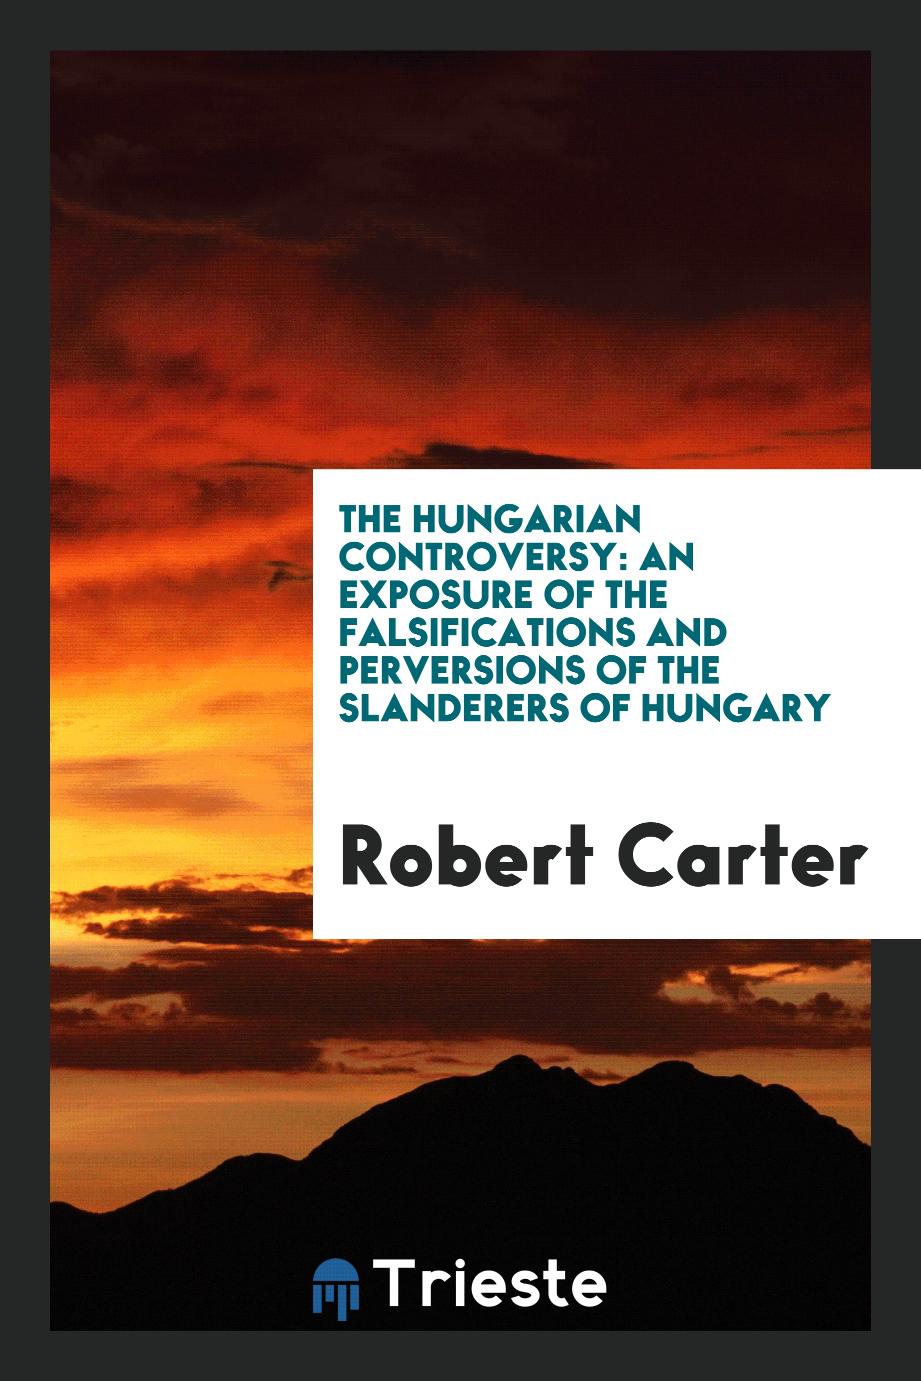 The Hungarian Controversy: An Exposure of the Falsifications and Perversions of the Slanderers of Hungary